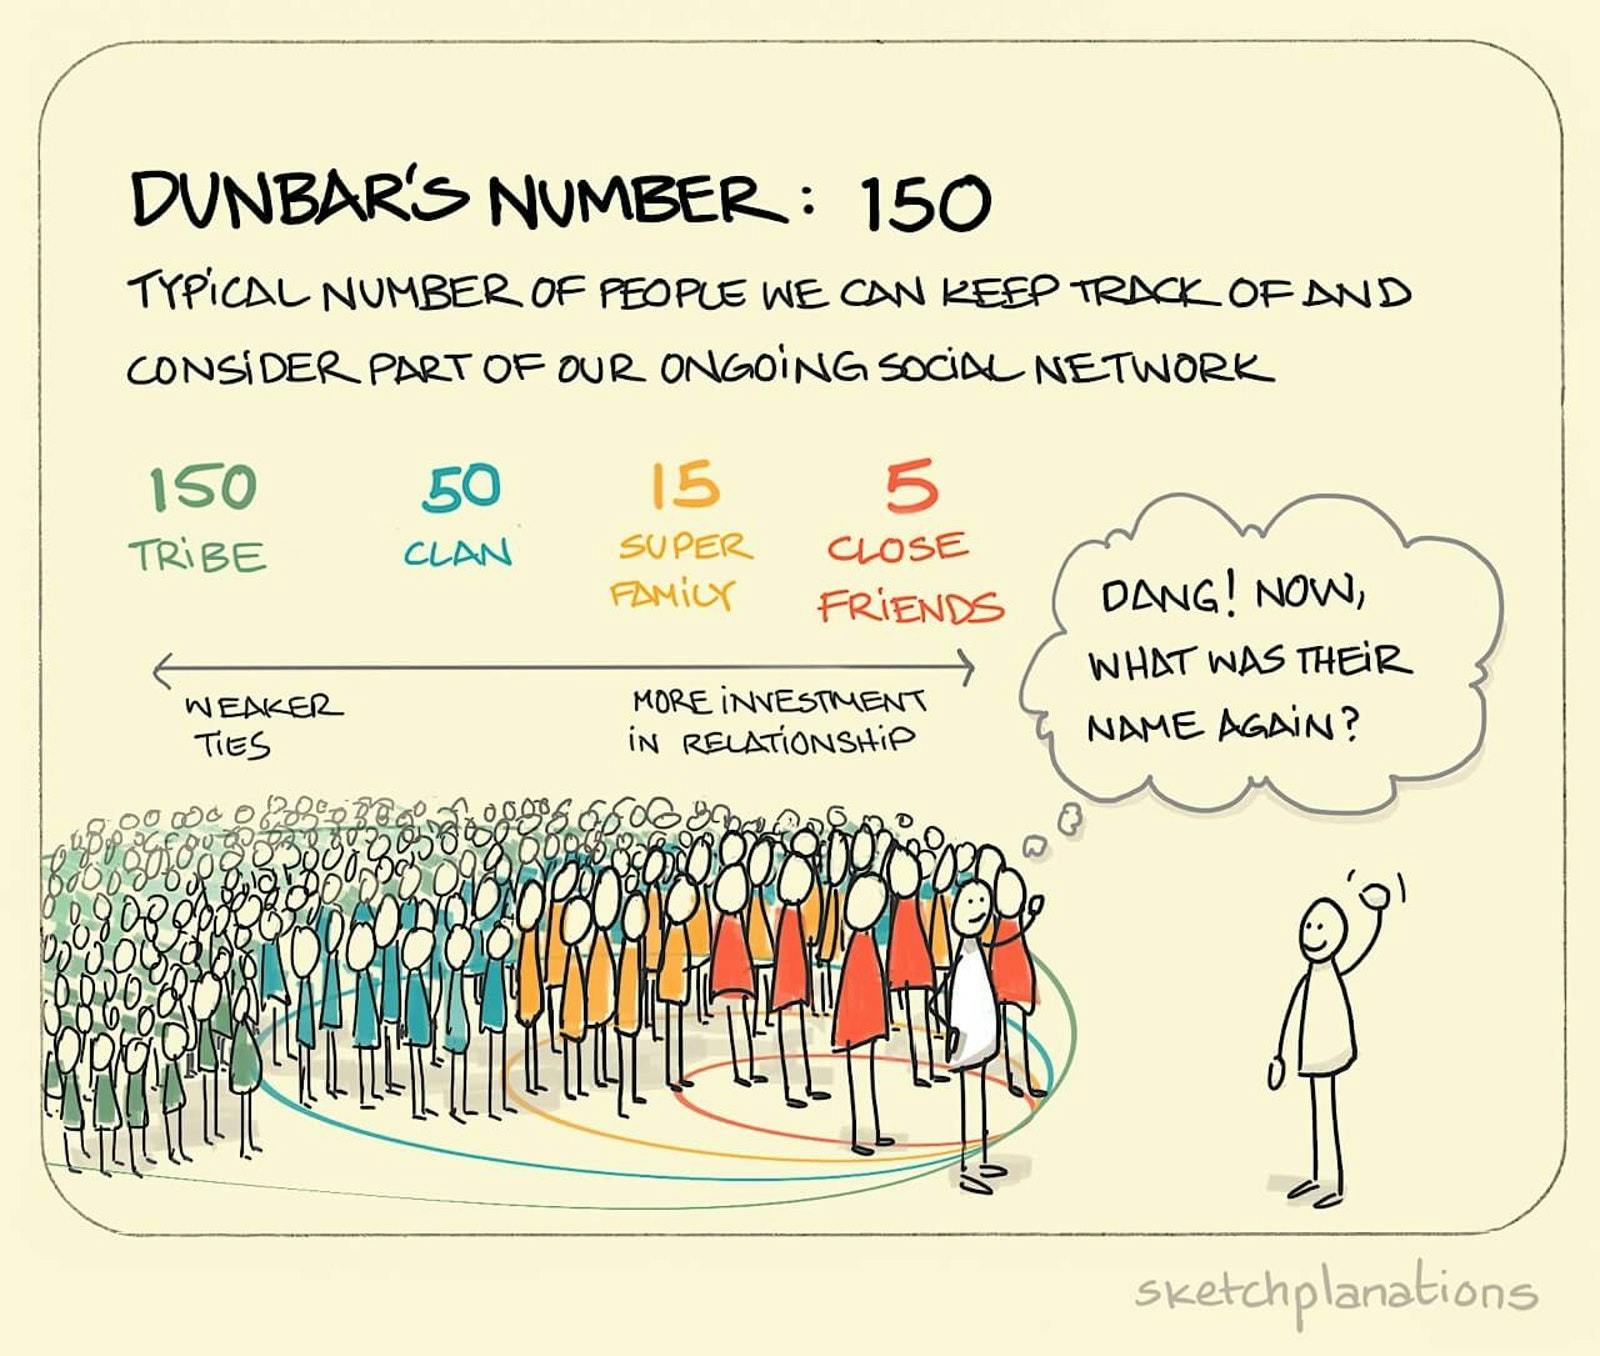 Dunbar's number, as illustrated by sketchplanations